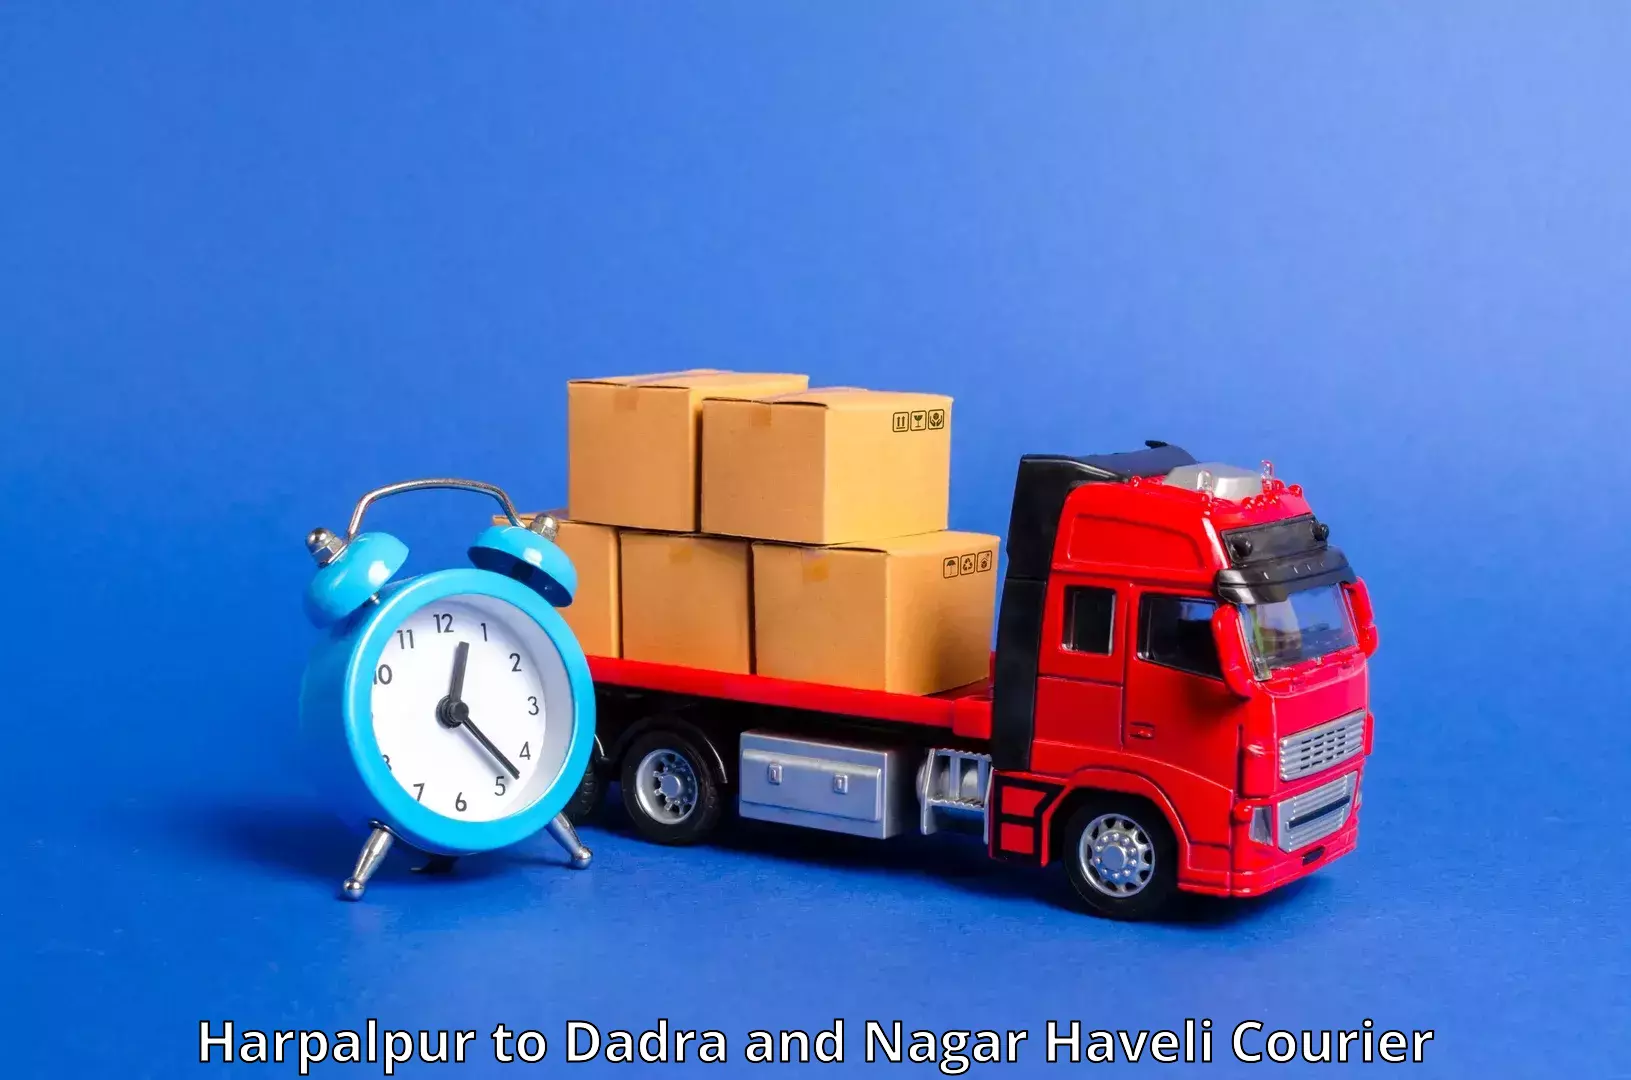 Nationwide parcel services Harpalpur to Dadra and Nagar Haveli